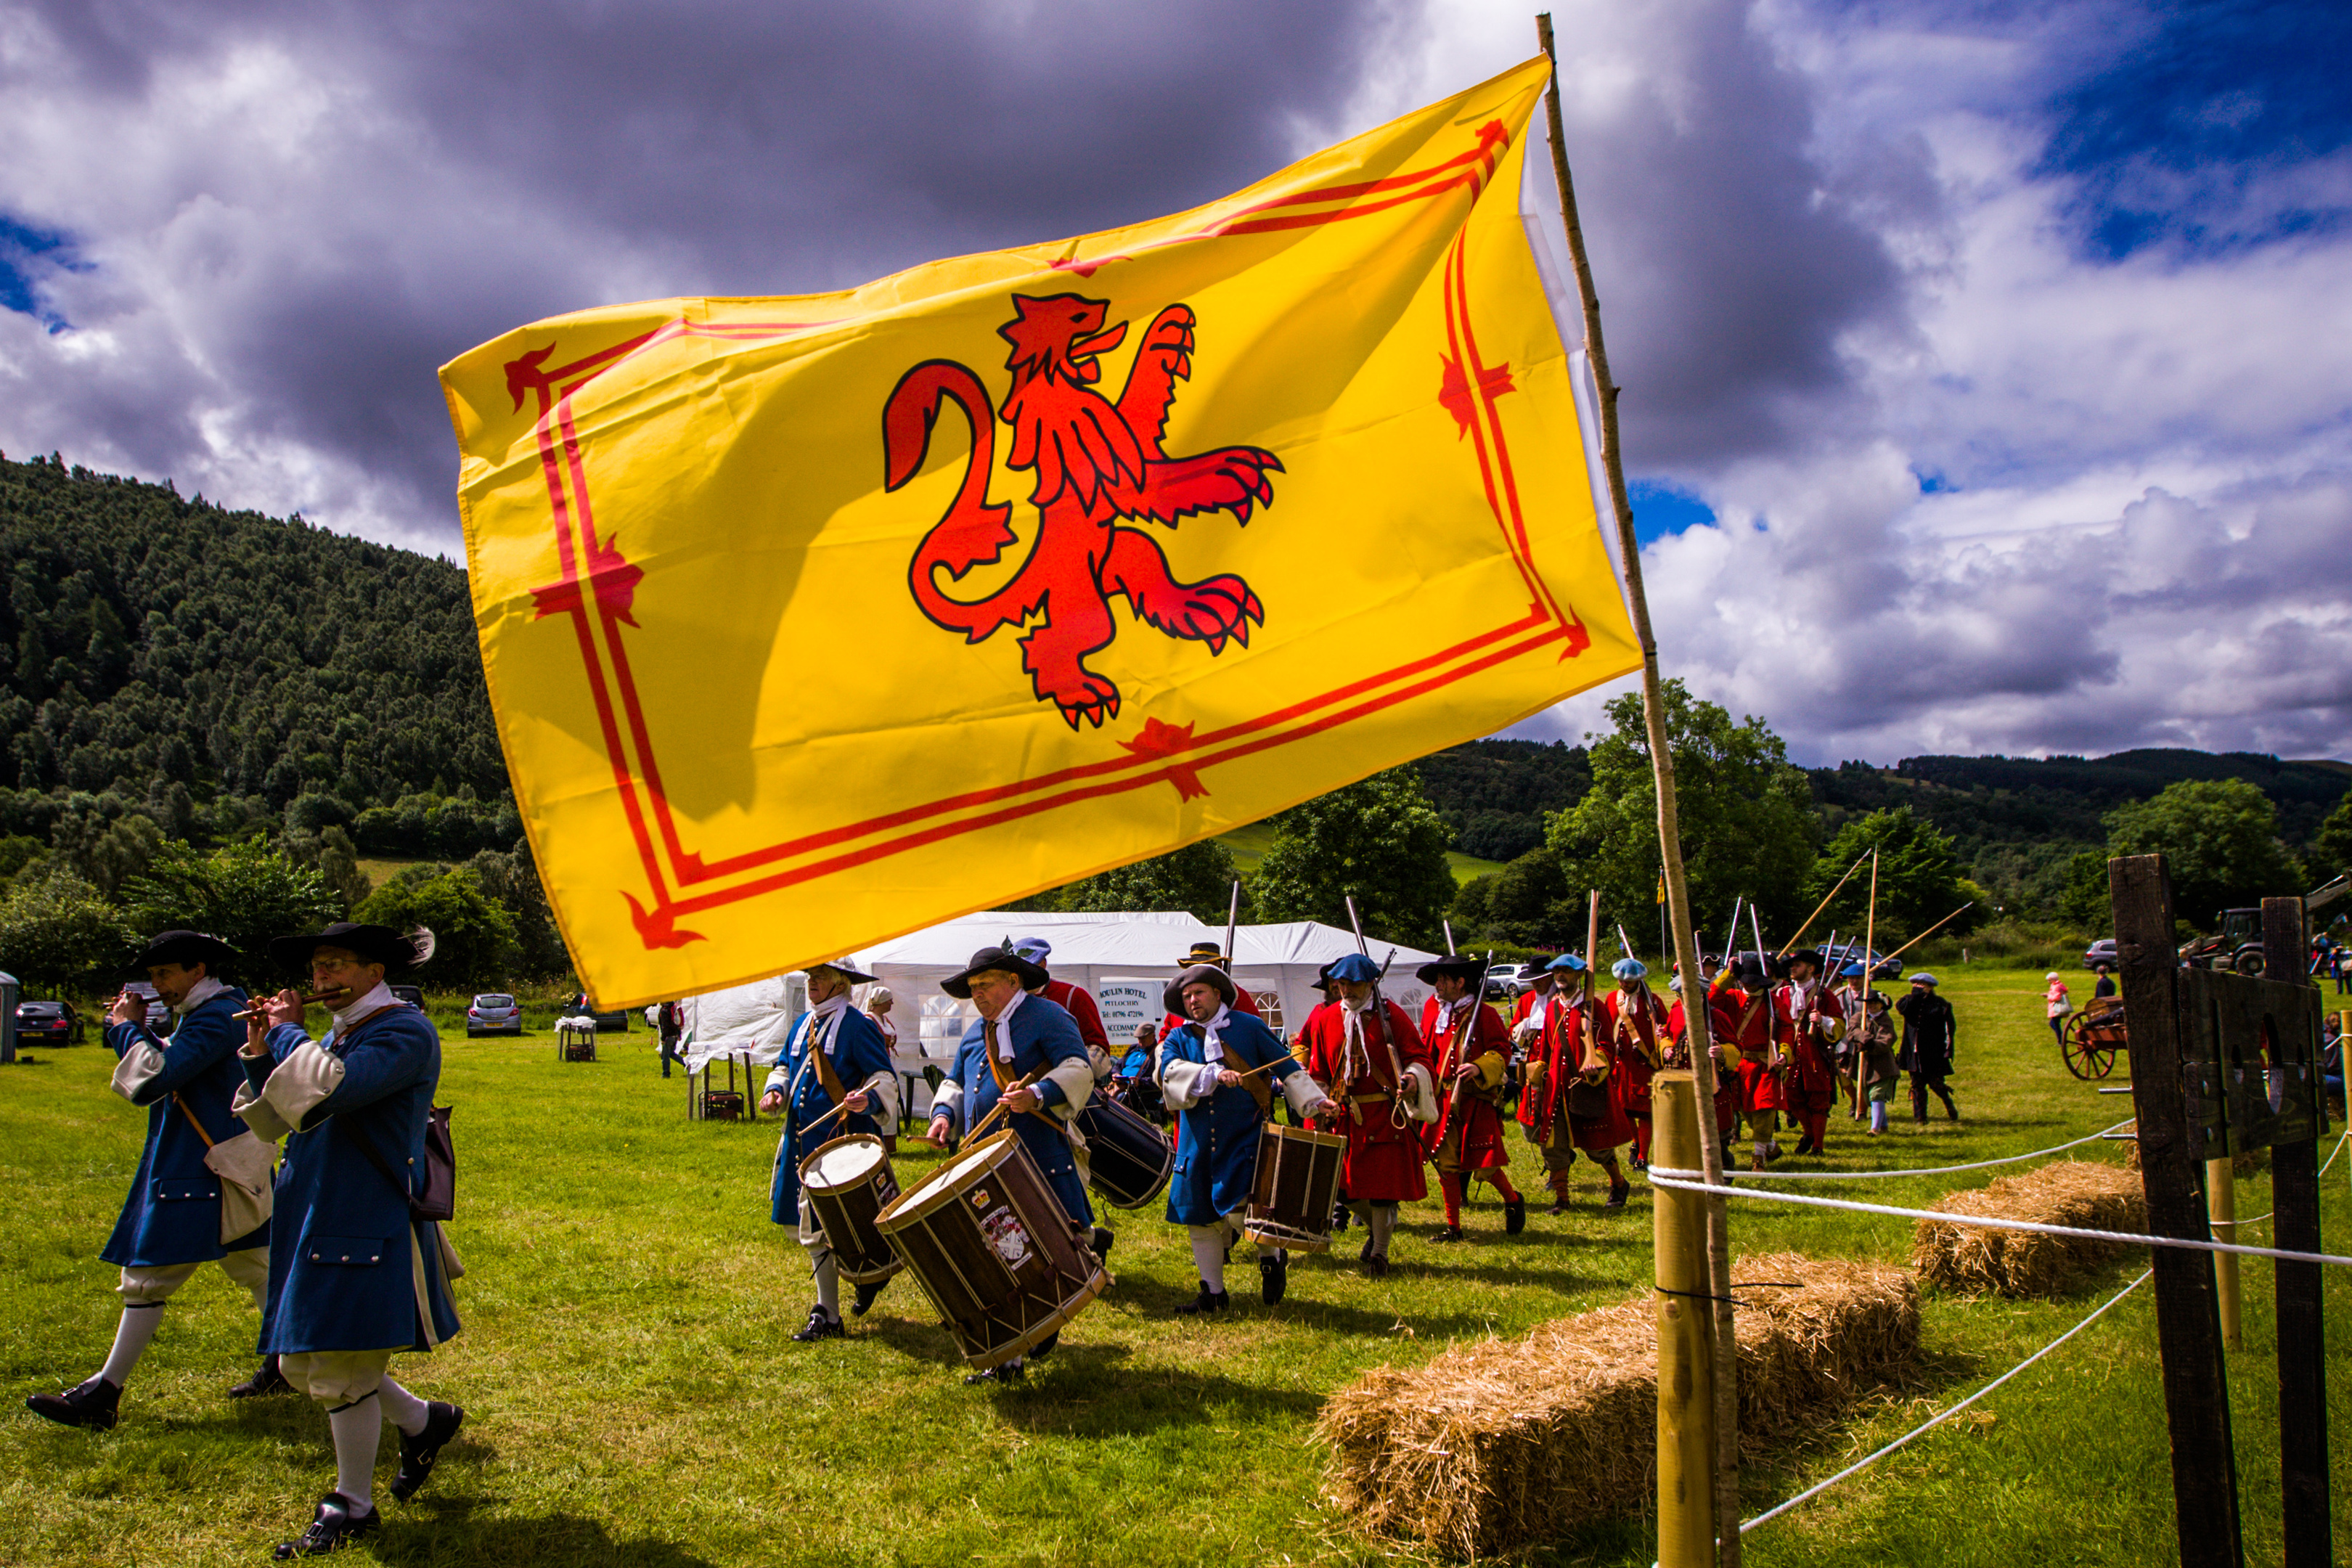 The Battle of Killiecrankie reenactment. Picture shows scenes from the main arena during the 'Infantry - Government Troops' display. Killiecrankie Battlefield.